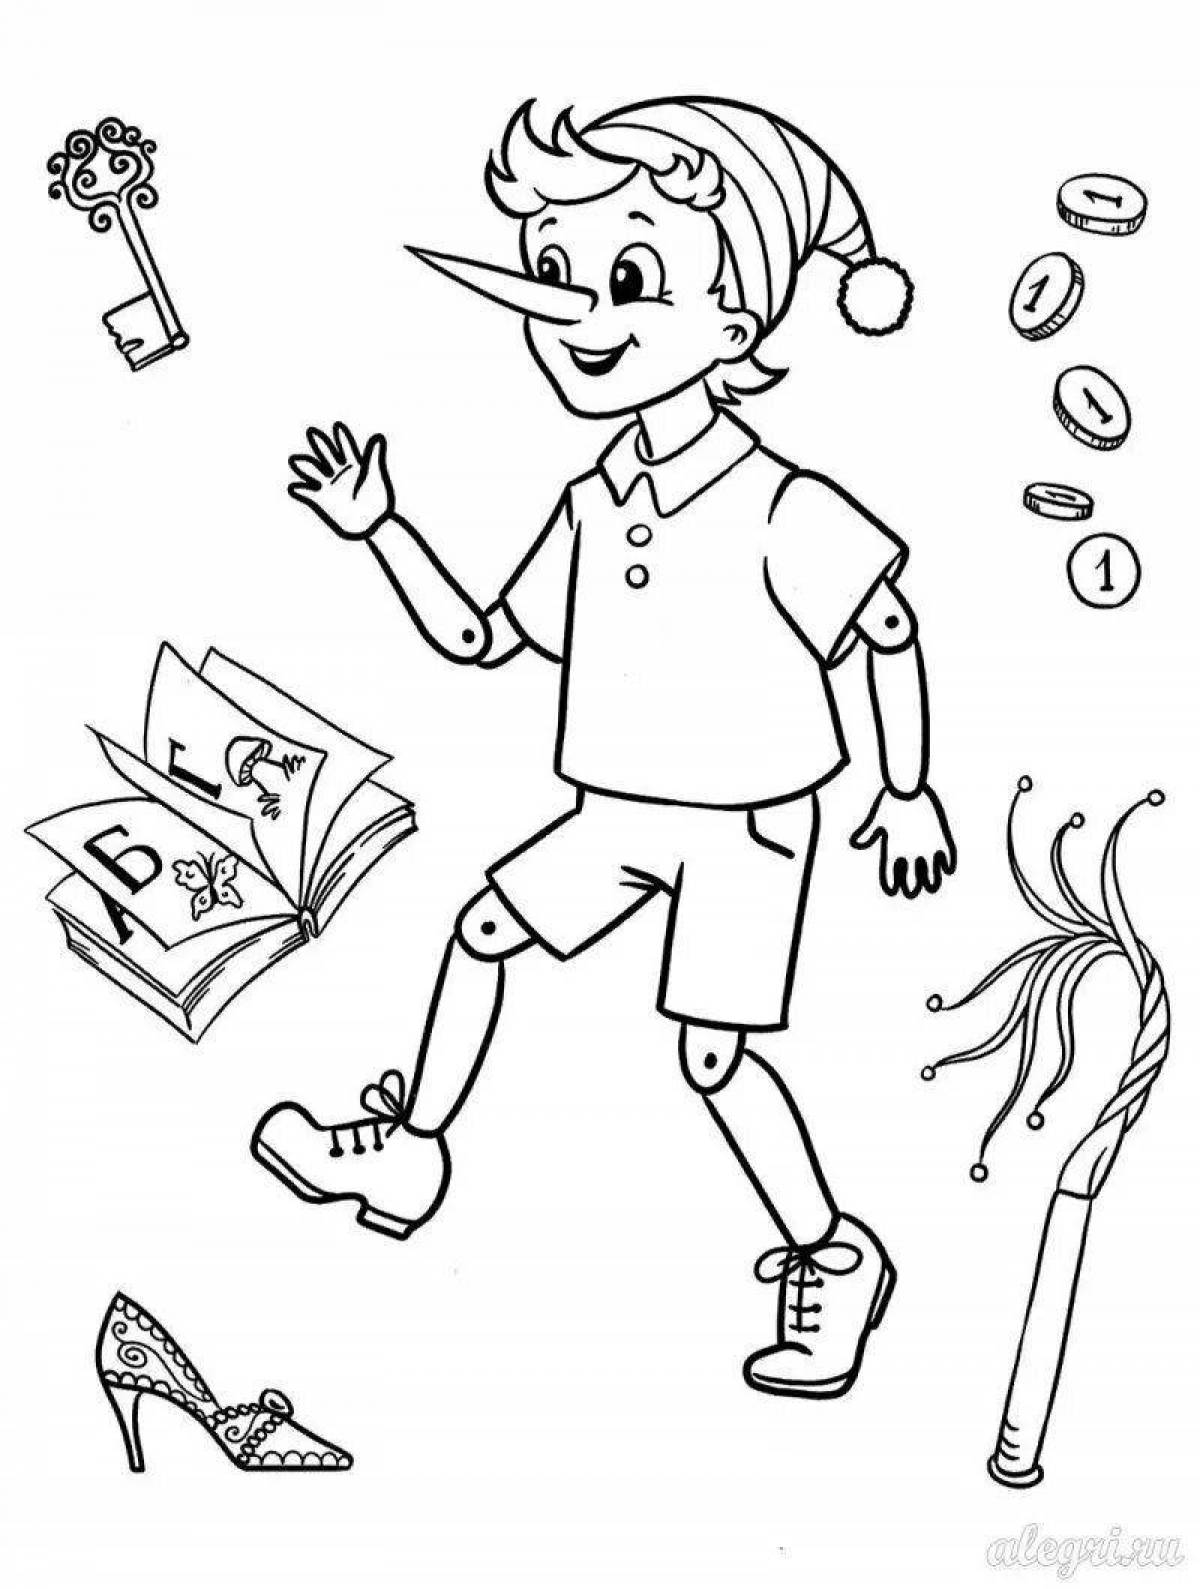 Primary School Financial Literacy Coloring Page